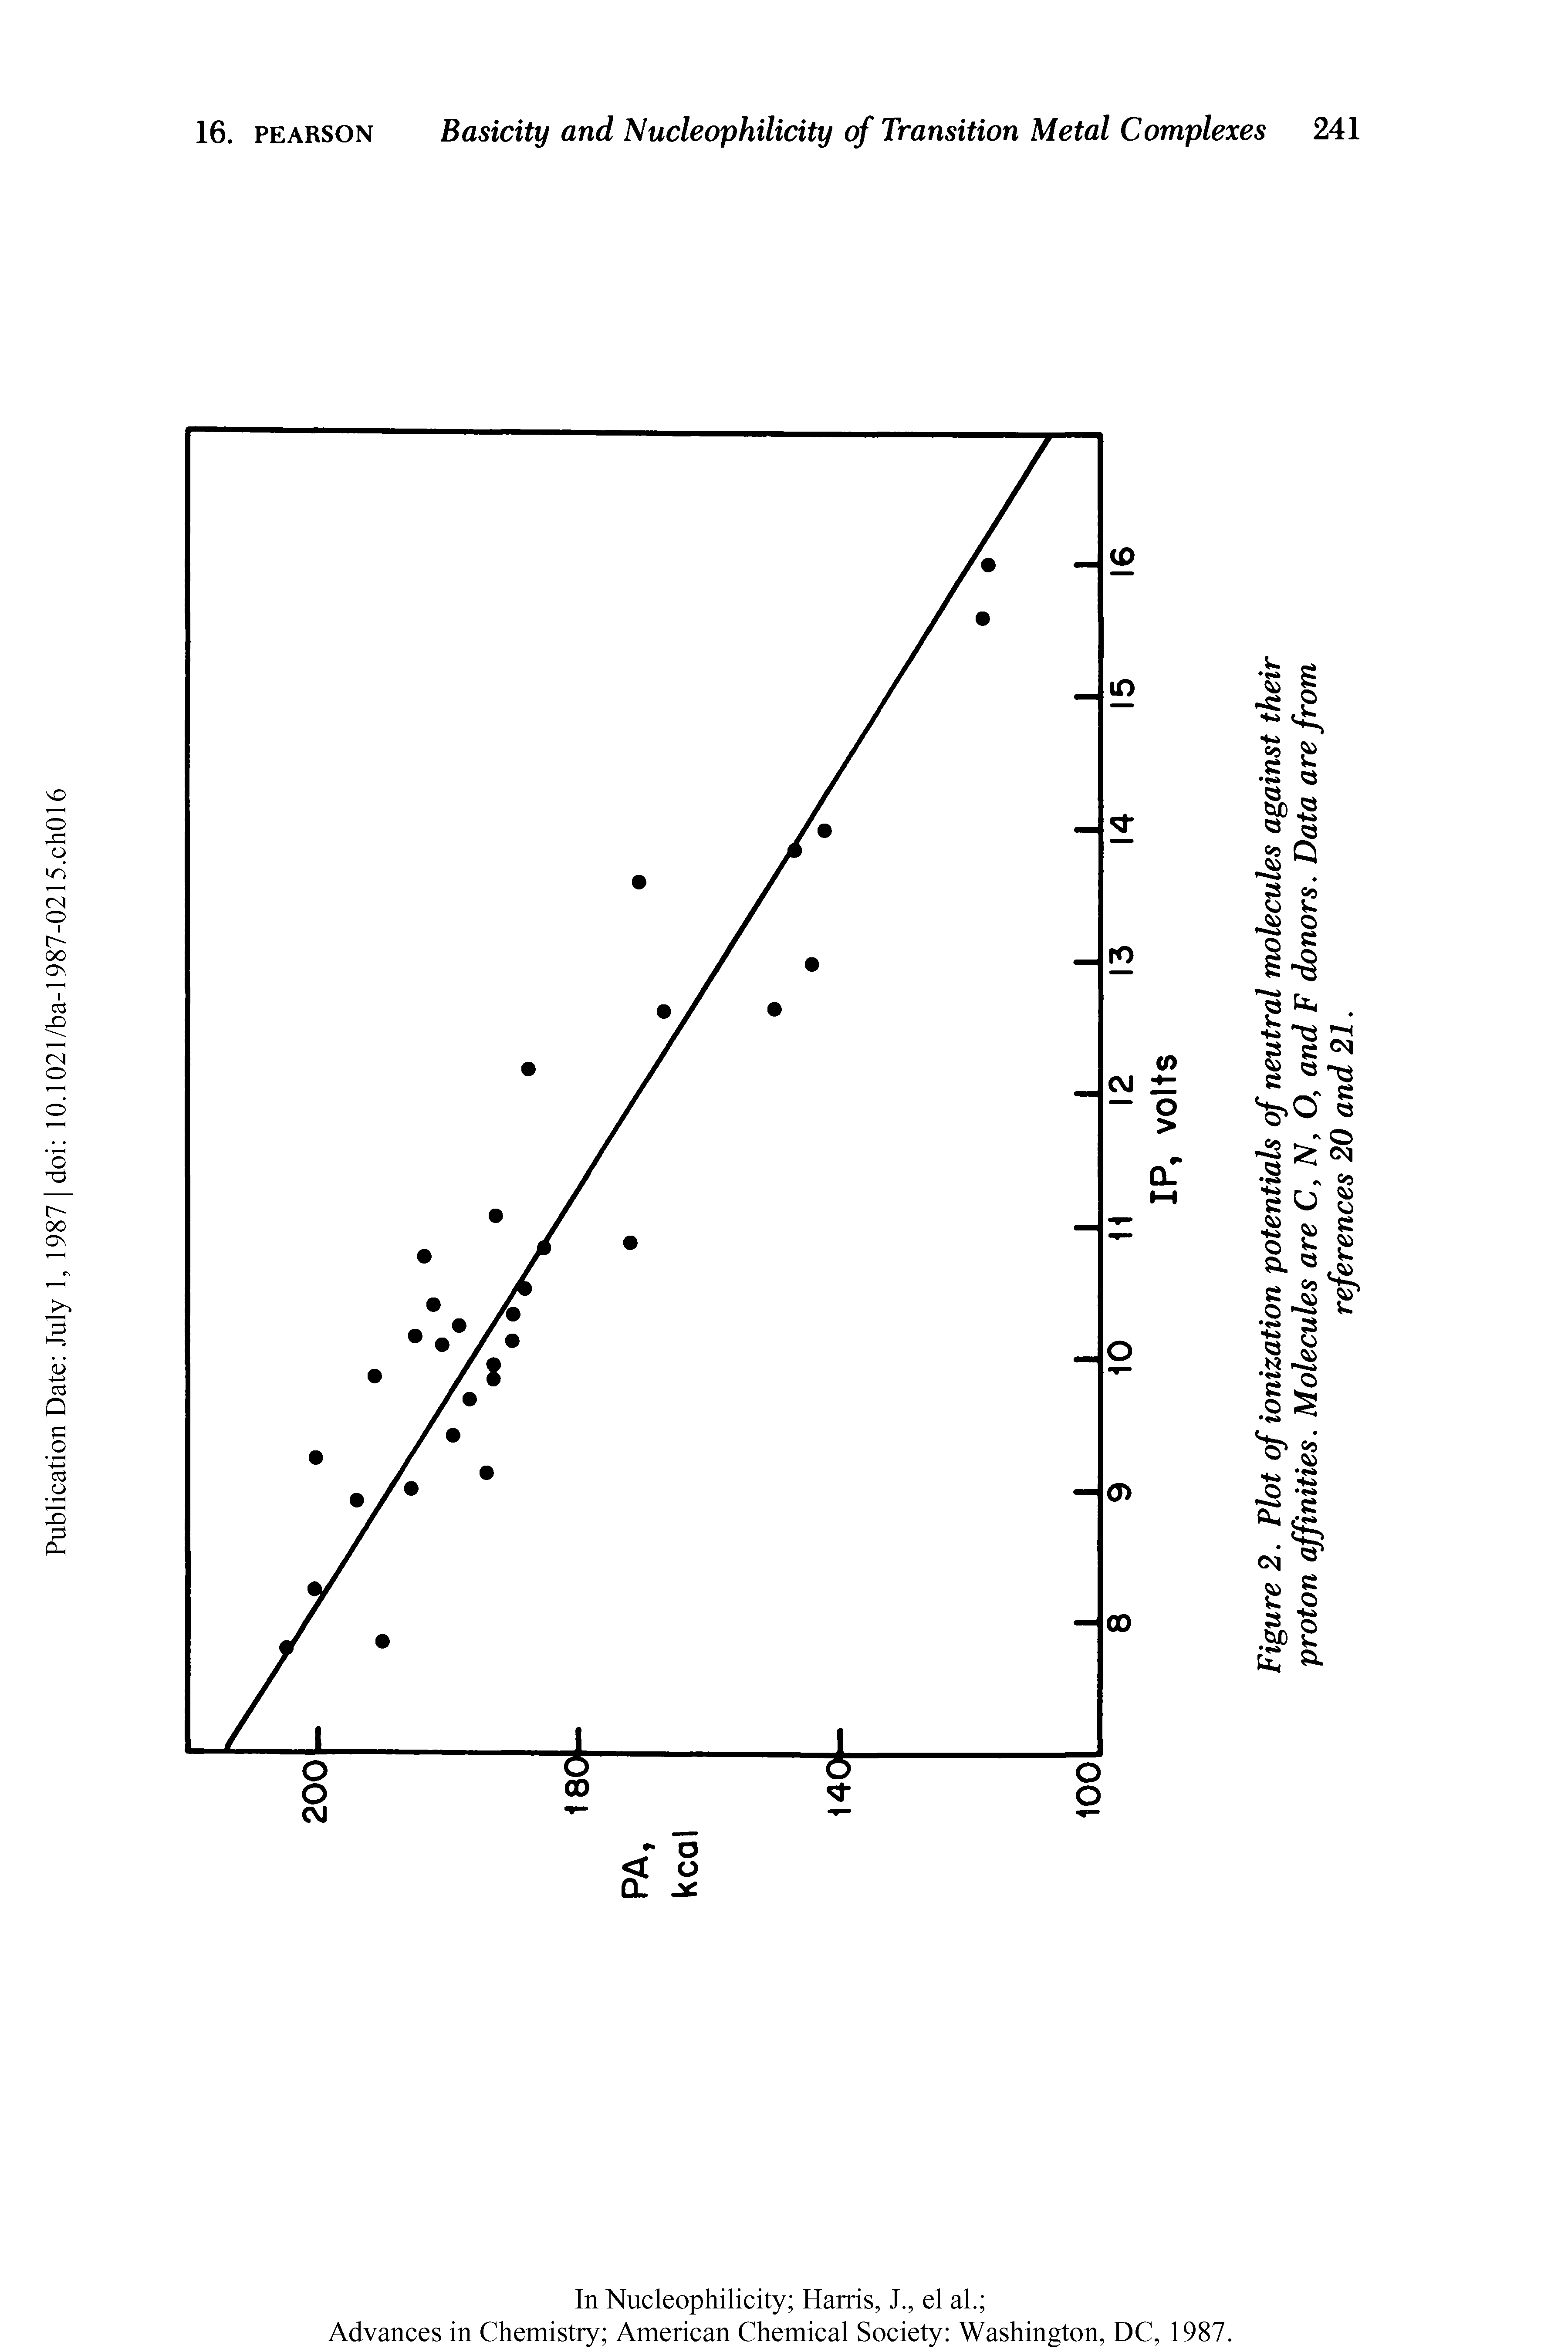 Figure 2. Plot of ionization potentials of neutral molecules against their proton affinities. Molecules are C, N, O, and F donors. Data are from references 20 and 21.